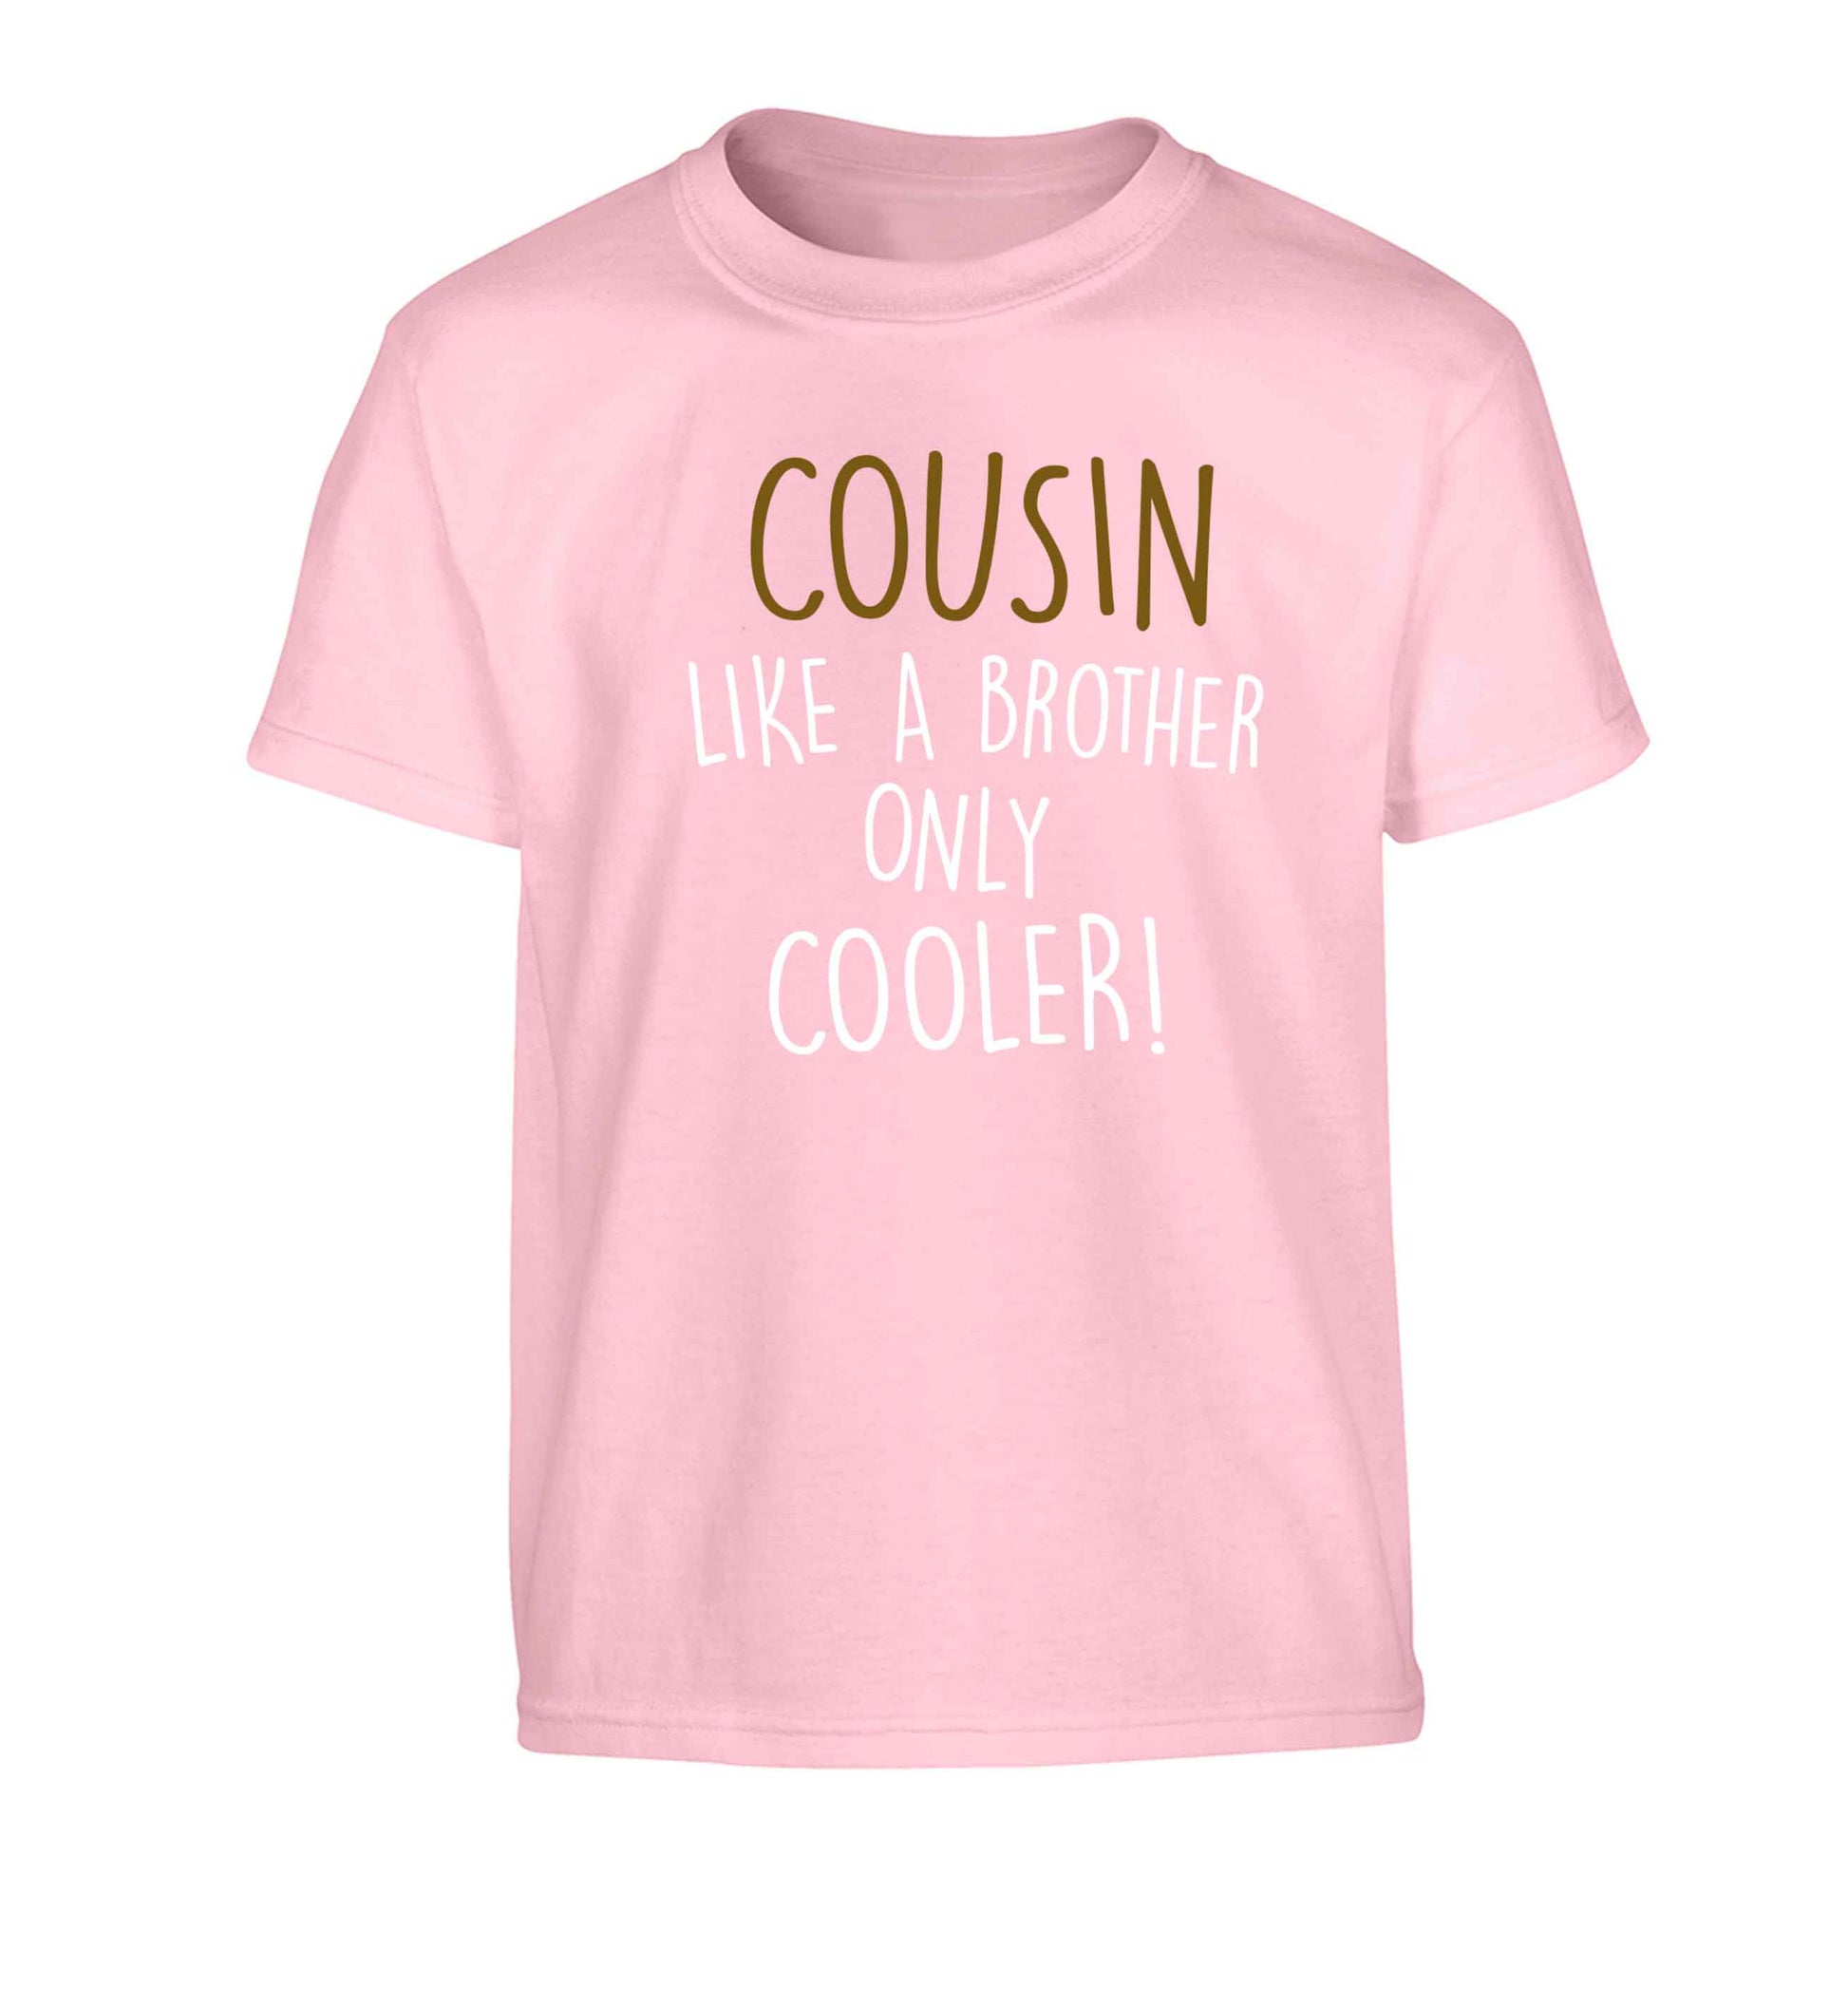 Cousin like a brother only cooler Children's light pink Tshirt 12-13 Years